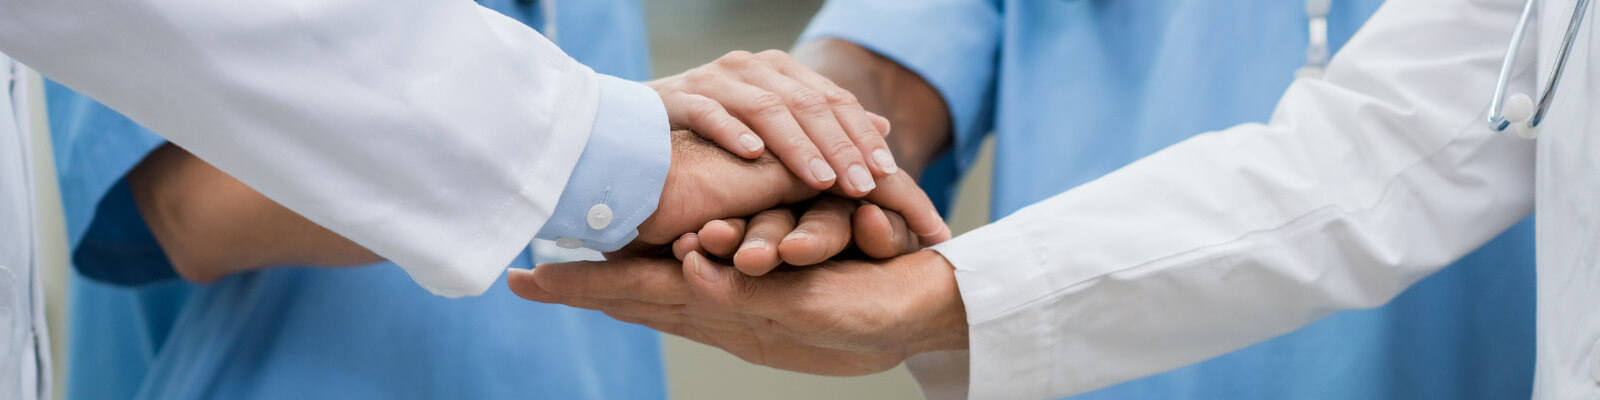 Medical professionals put their hands together in solidarity